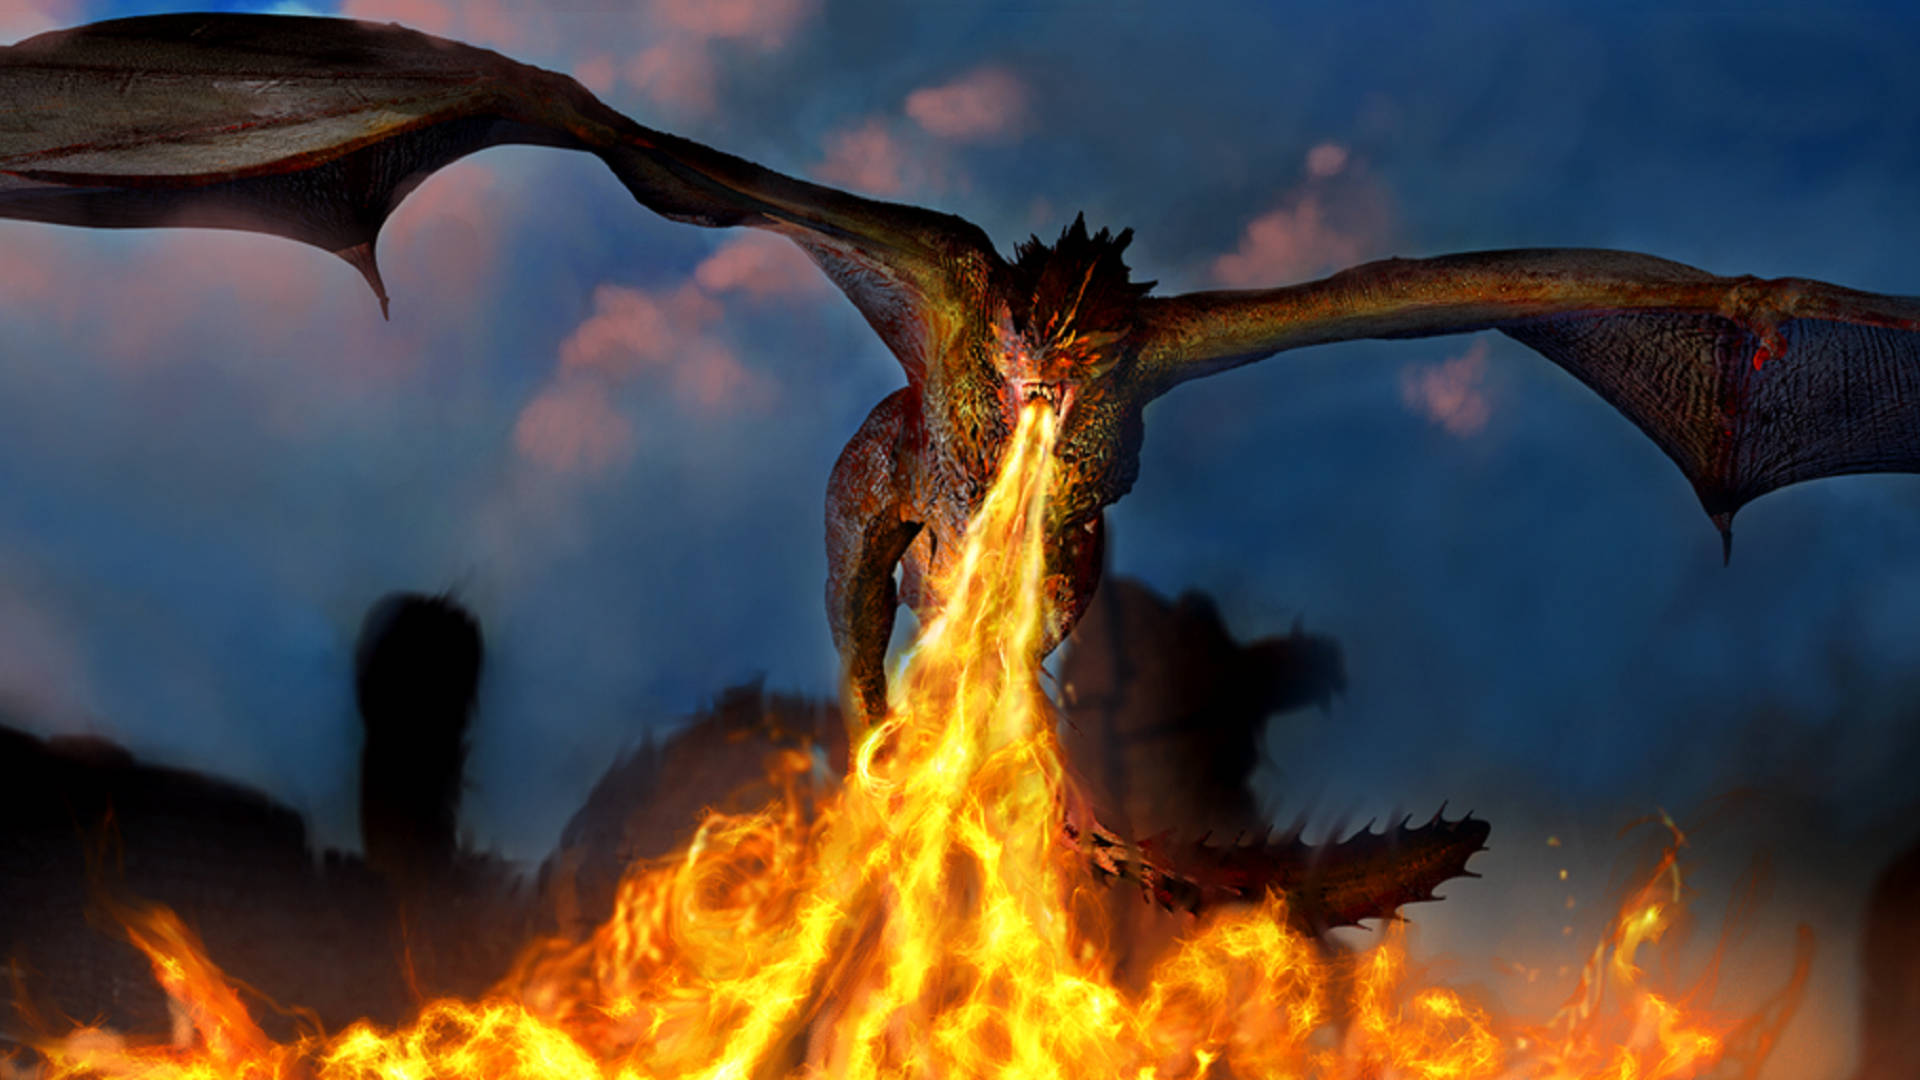 A dragon breathing fire towards the camera